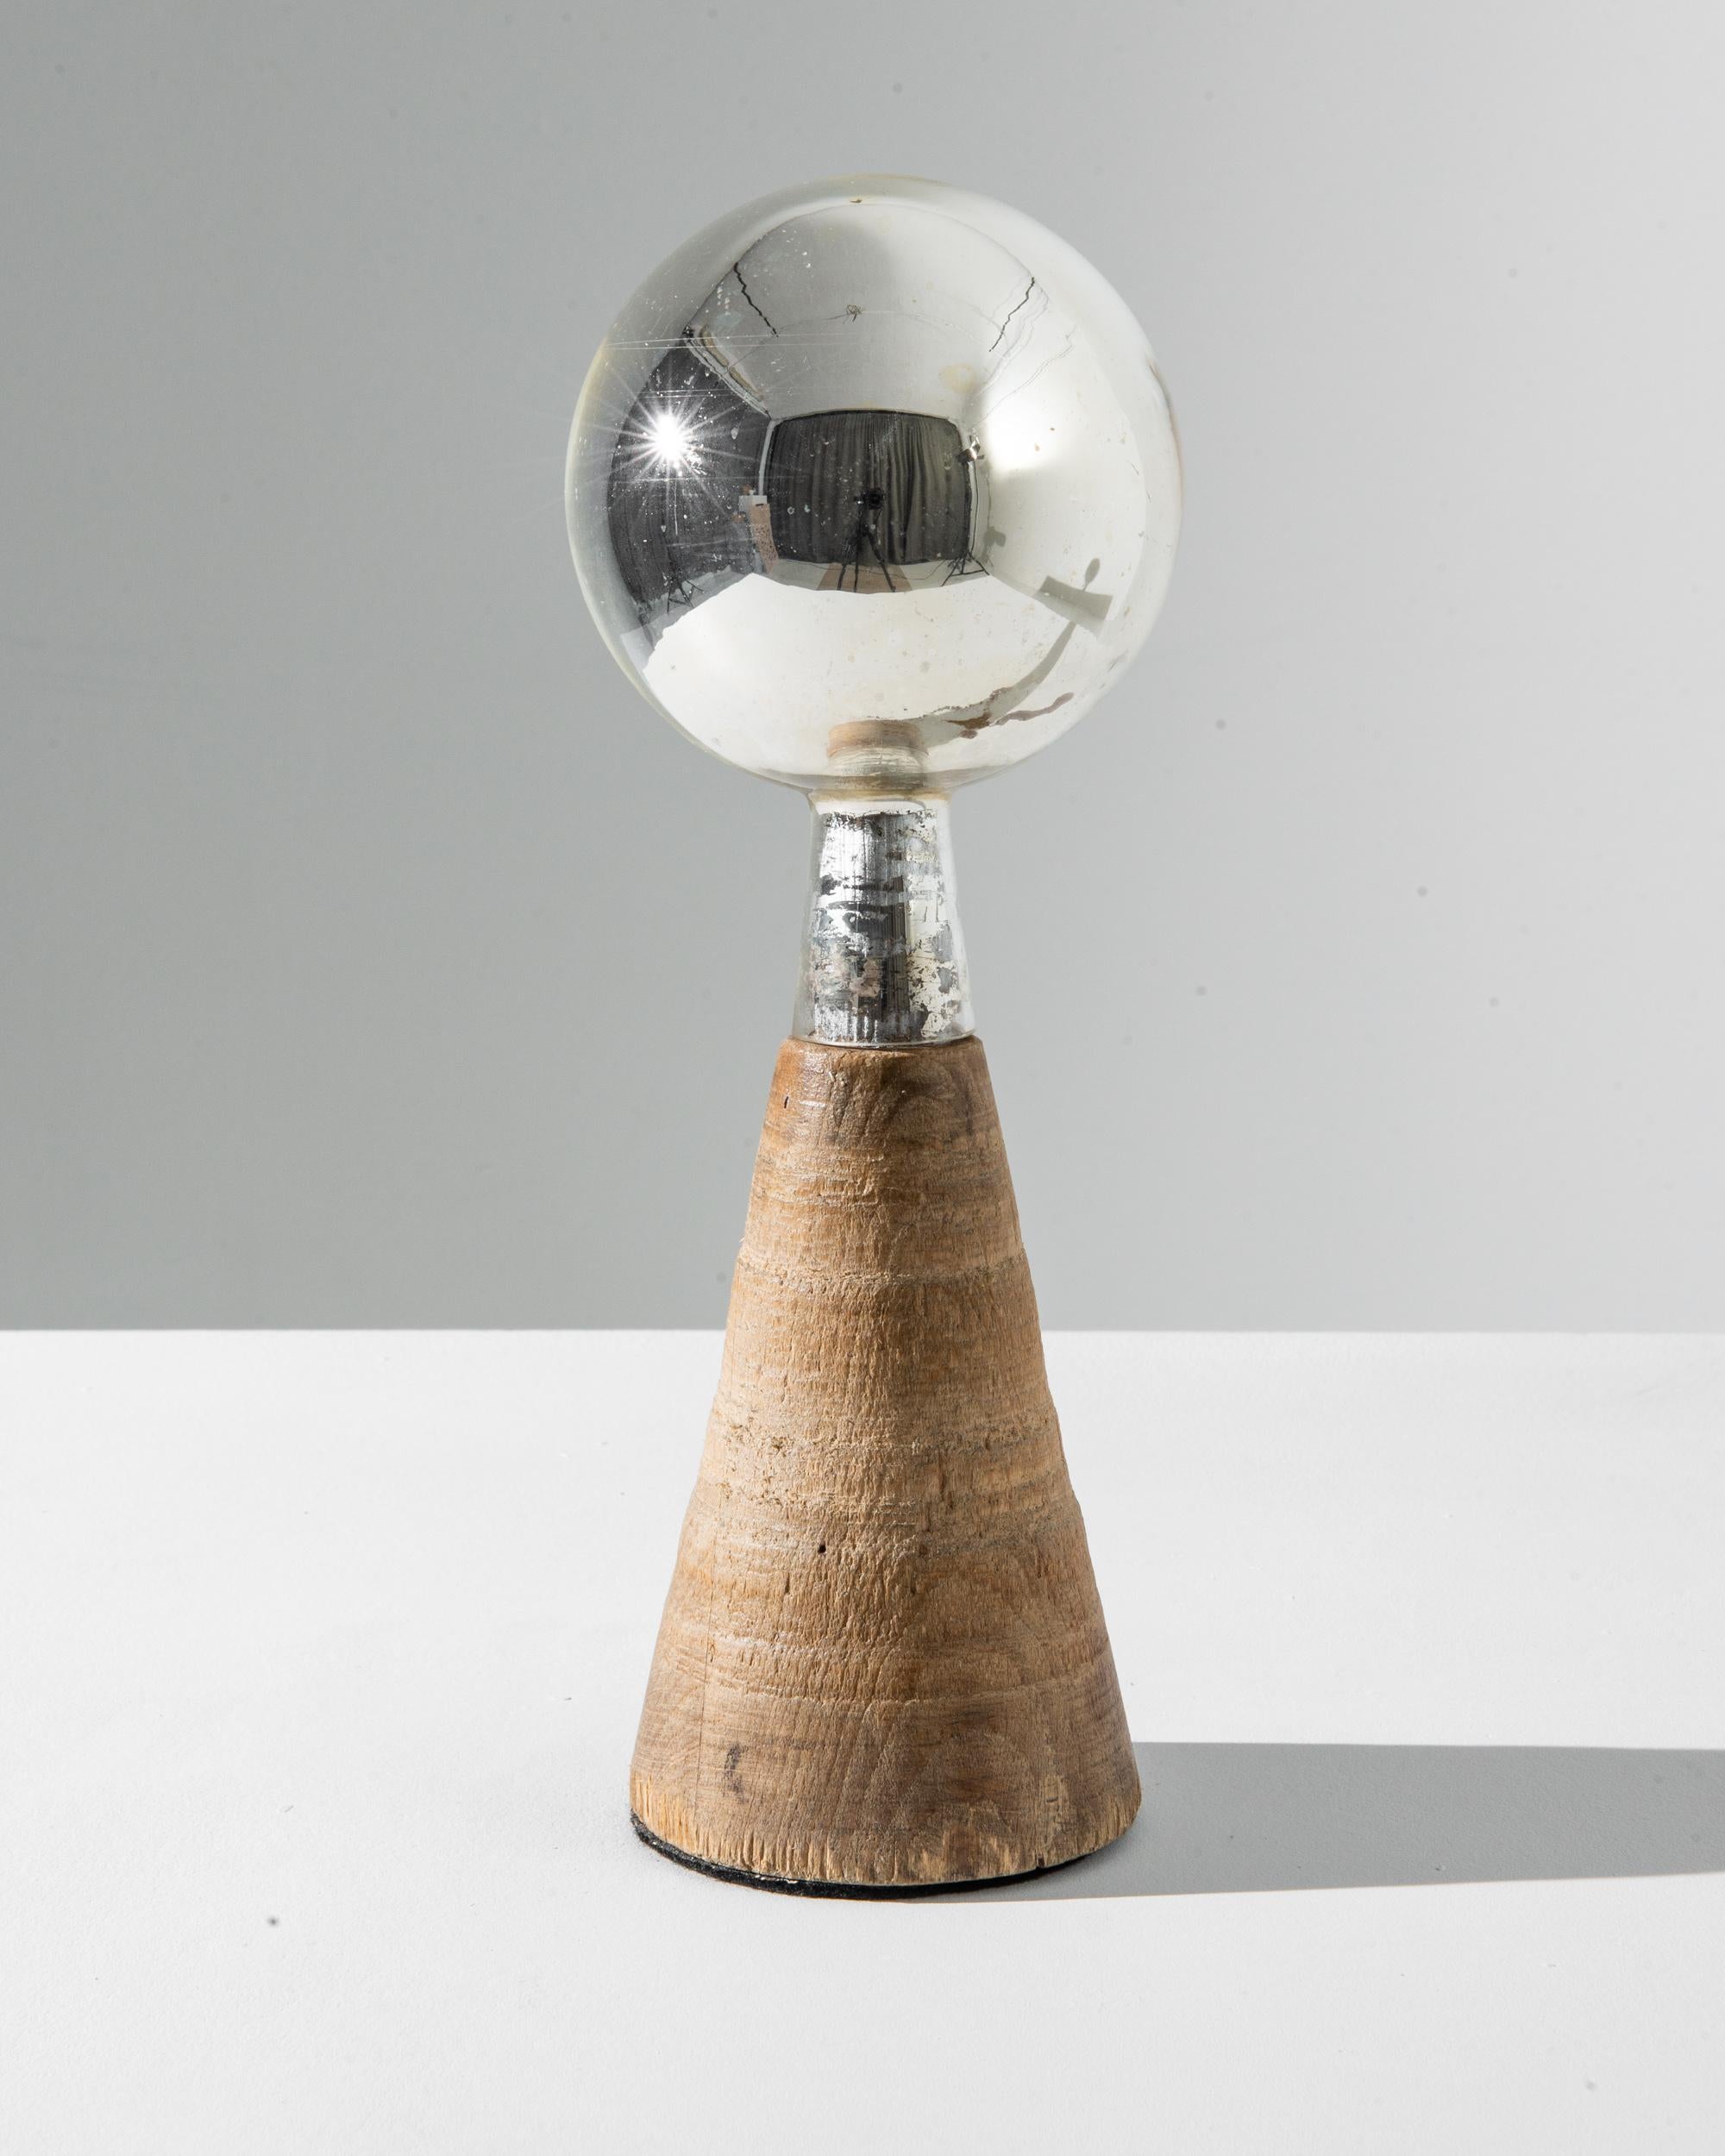 Clear yet ethereal, this vintage wood and glass decoration makes an endlessly intriguing accent. Made in France in the 20th century, the composition has a graphic simplicity: a sphere of mercury glass sits atop a cone of natural wood. The silvered